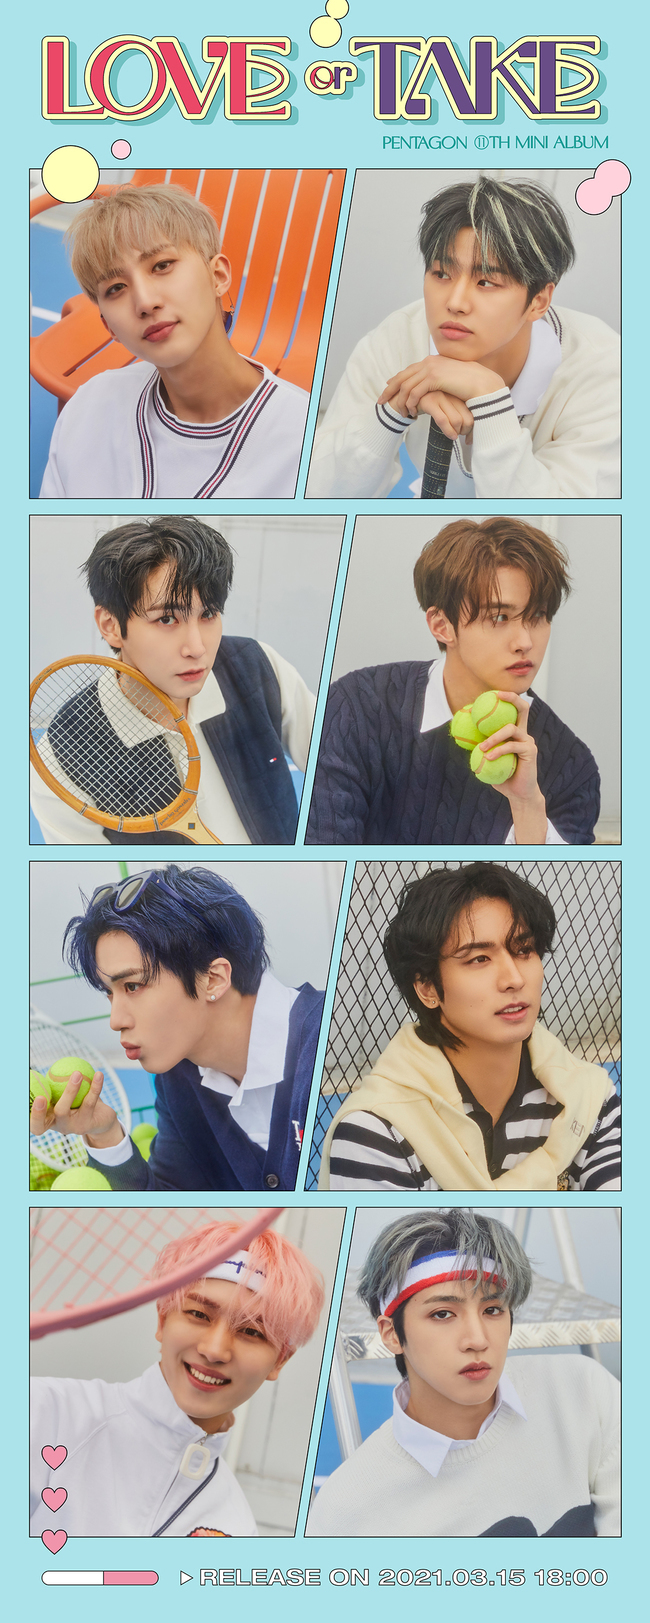 The Group Pentagon boasted a refreshing Attractiveness.Cube Entertainment released its second Conceptss Image of its mini-11 album LOVE or TAKE (Love All Take) on the Pentagons official SNS channel on March 4.The Pentagon in the public Image boasts a refreshing visual with a blue tennis court in the background.Especially, stylish sporty look, tennis ball, racket, etc., combined with the Pentagons unique clean energy and gave a different Attractiveness.The Pentagon released an illustration version of the preview Image before the Conceptss Image was released, amplifying the curiosity about the new Conceptss.Following the first Conceptss Image, which was prominent in the romantic mood, the Pentagon raised expectations for a new album with a thrilling visual that seemed to pop out of comic books.The Pentagon has been steadily growing globally with its unique music and Conceptss for each album.Global fans are attracting attention as the Pentagon, which is returning to its Conceptss in five months, is showing new features.